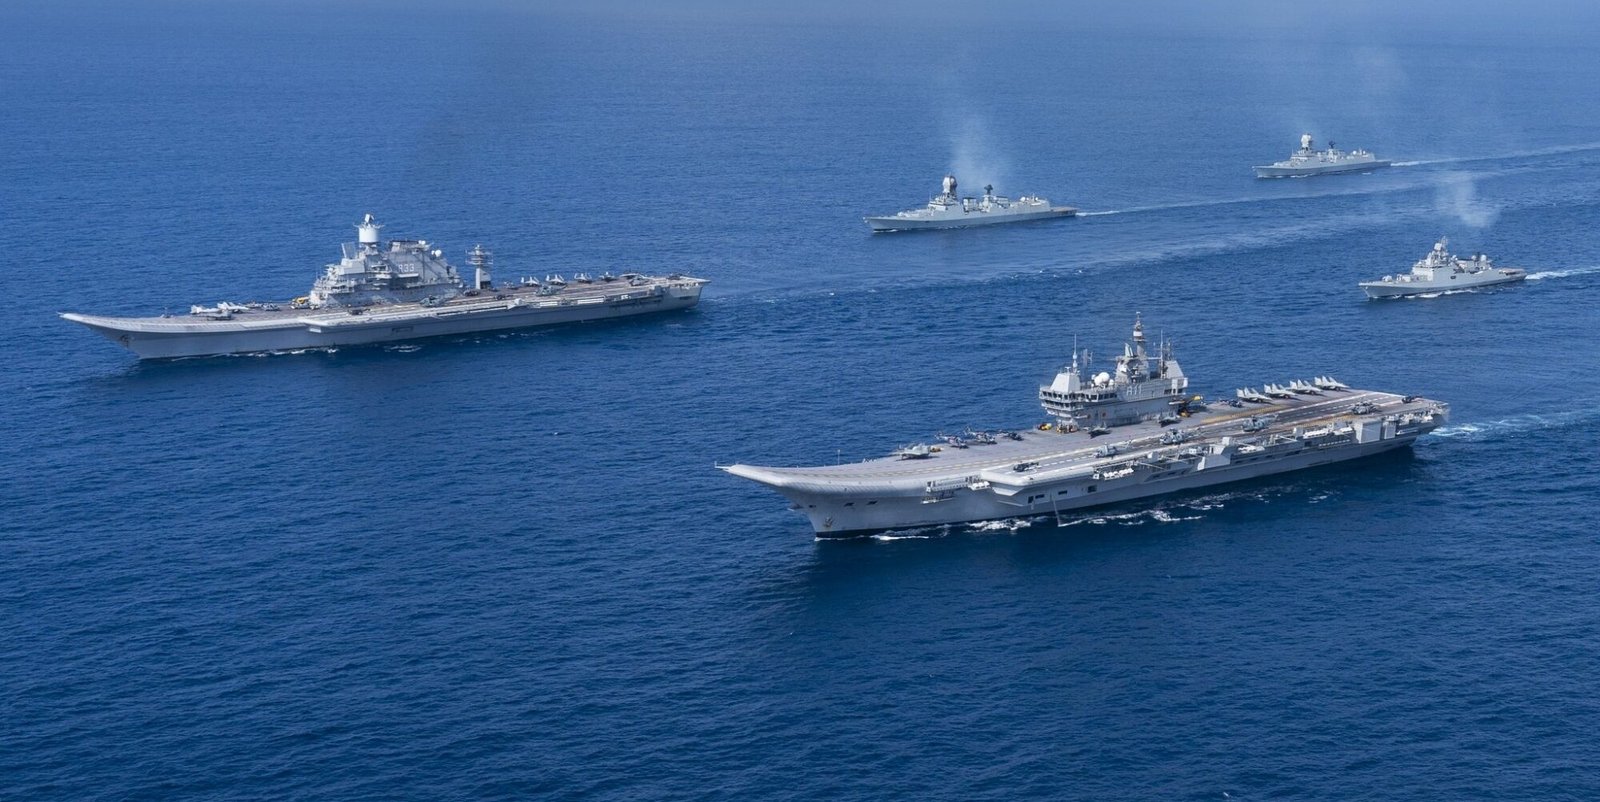 Indian Navy demonstrate formidable capability in Arabian Sea with aircraft carriers